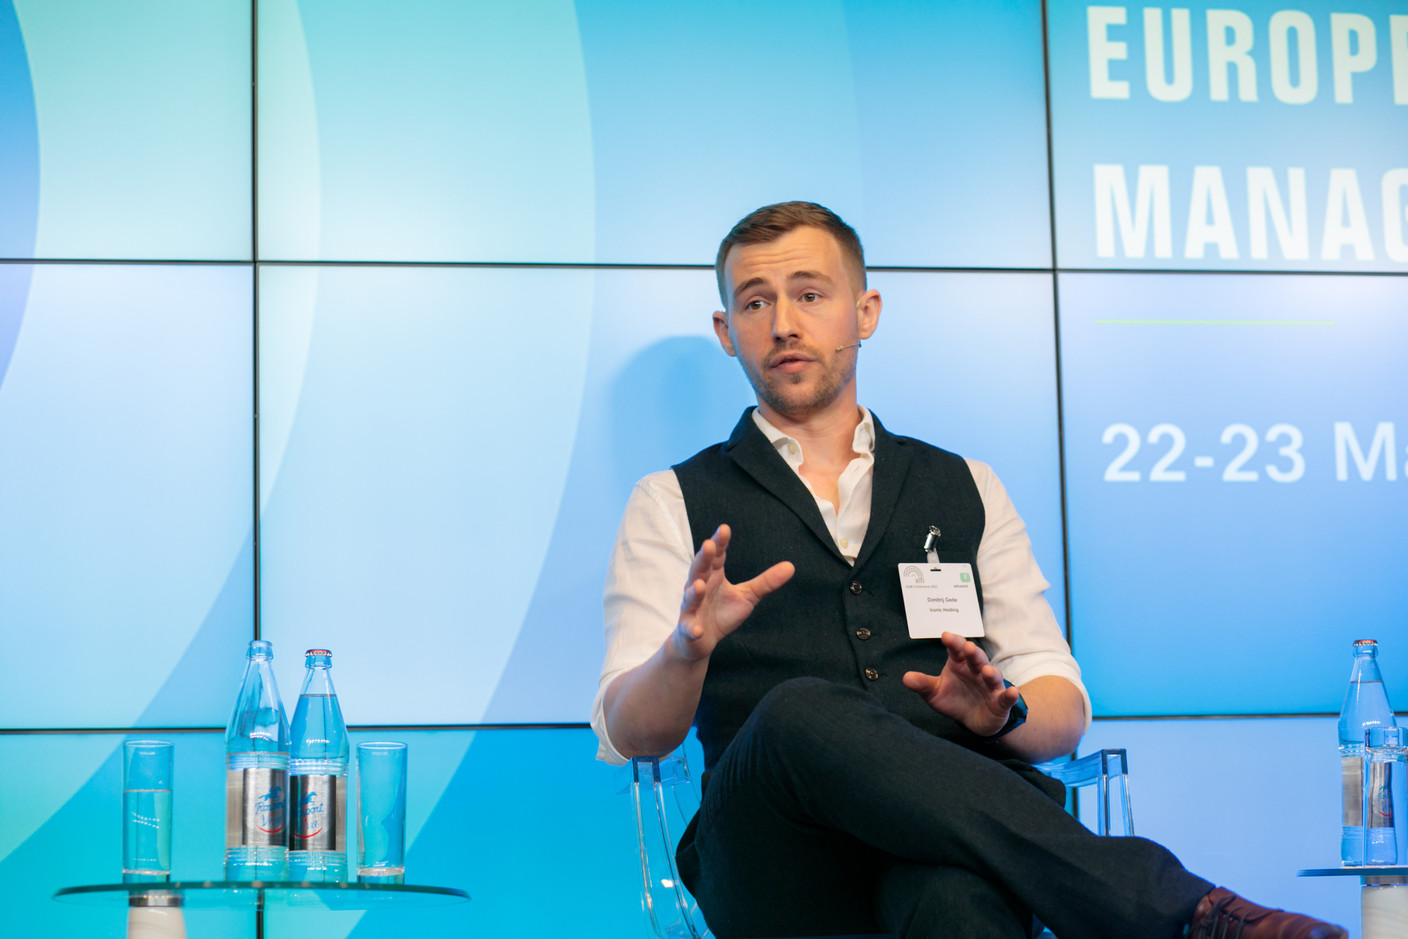 Dimitrij Gede of Iconic Holding is seen speaking at the “Digital custody” panel, 23 March 2022. Photo: Matic Zorman